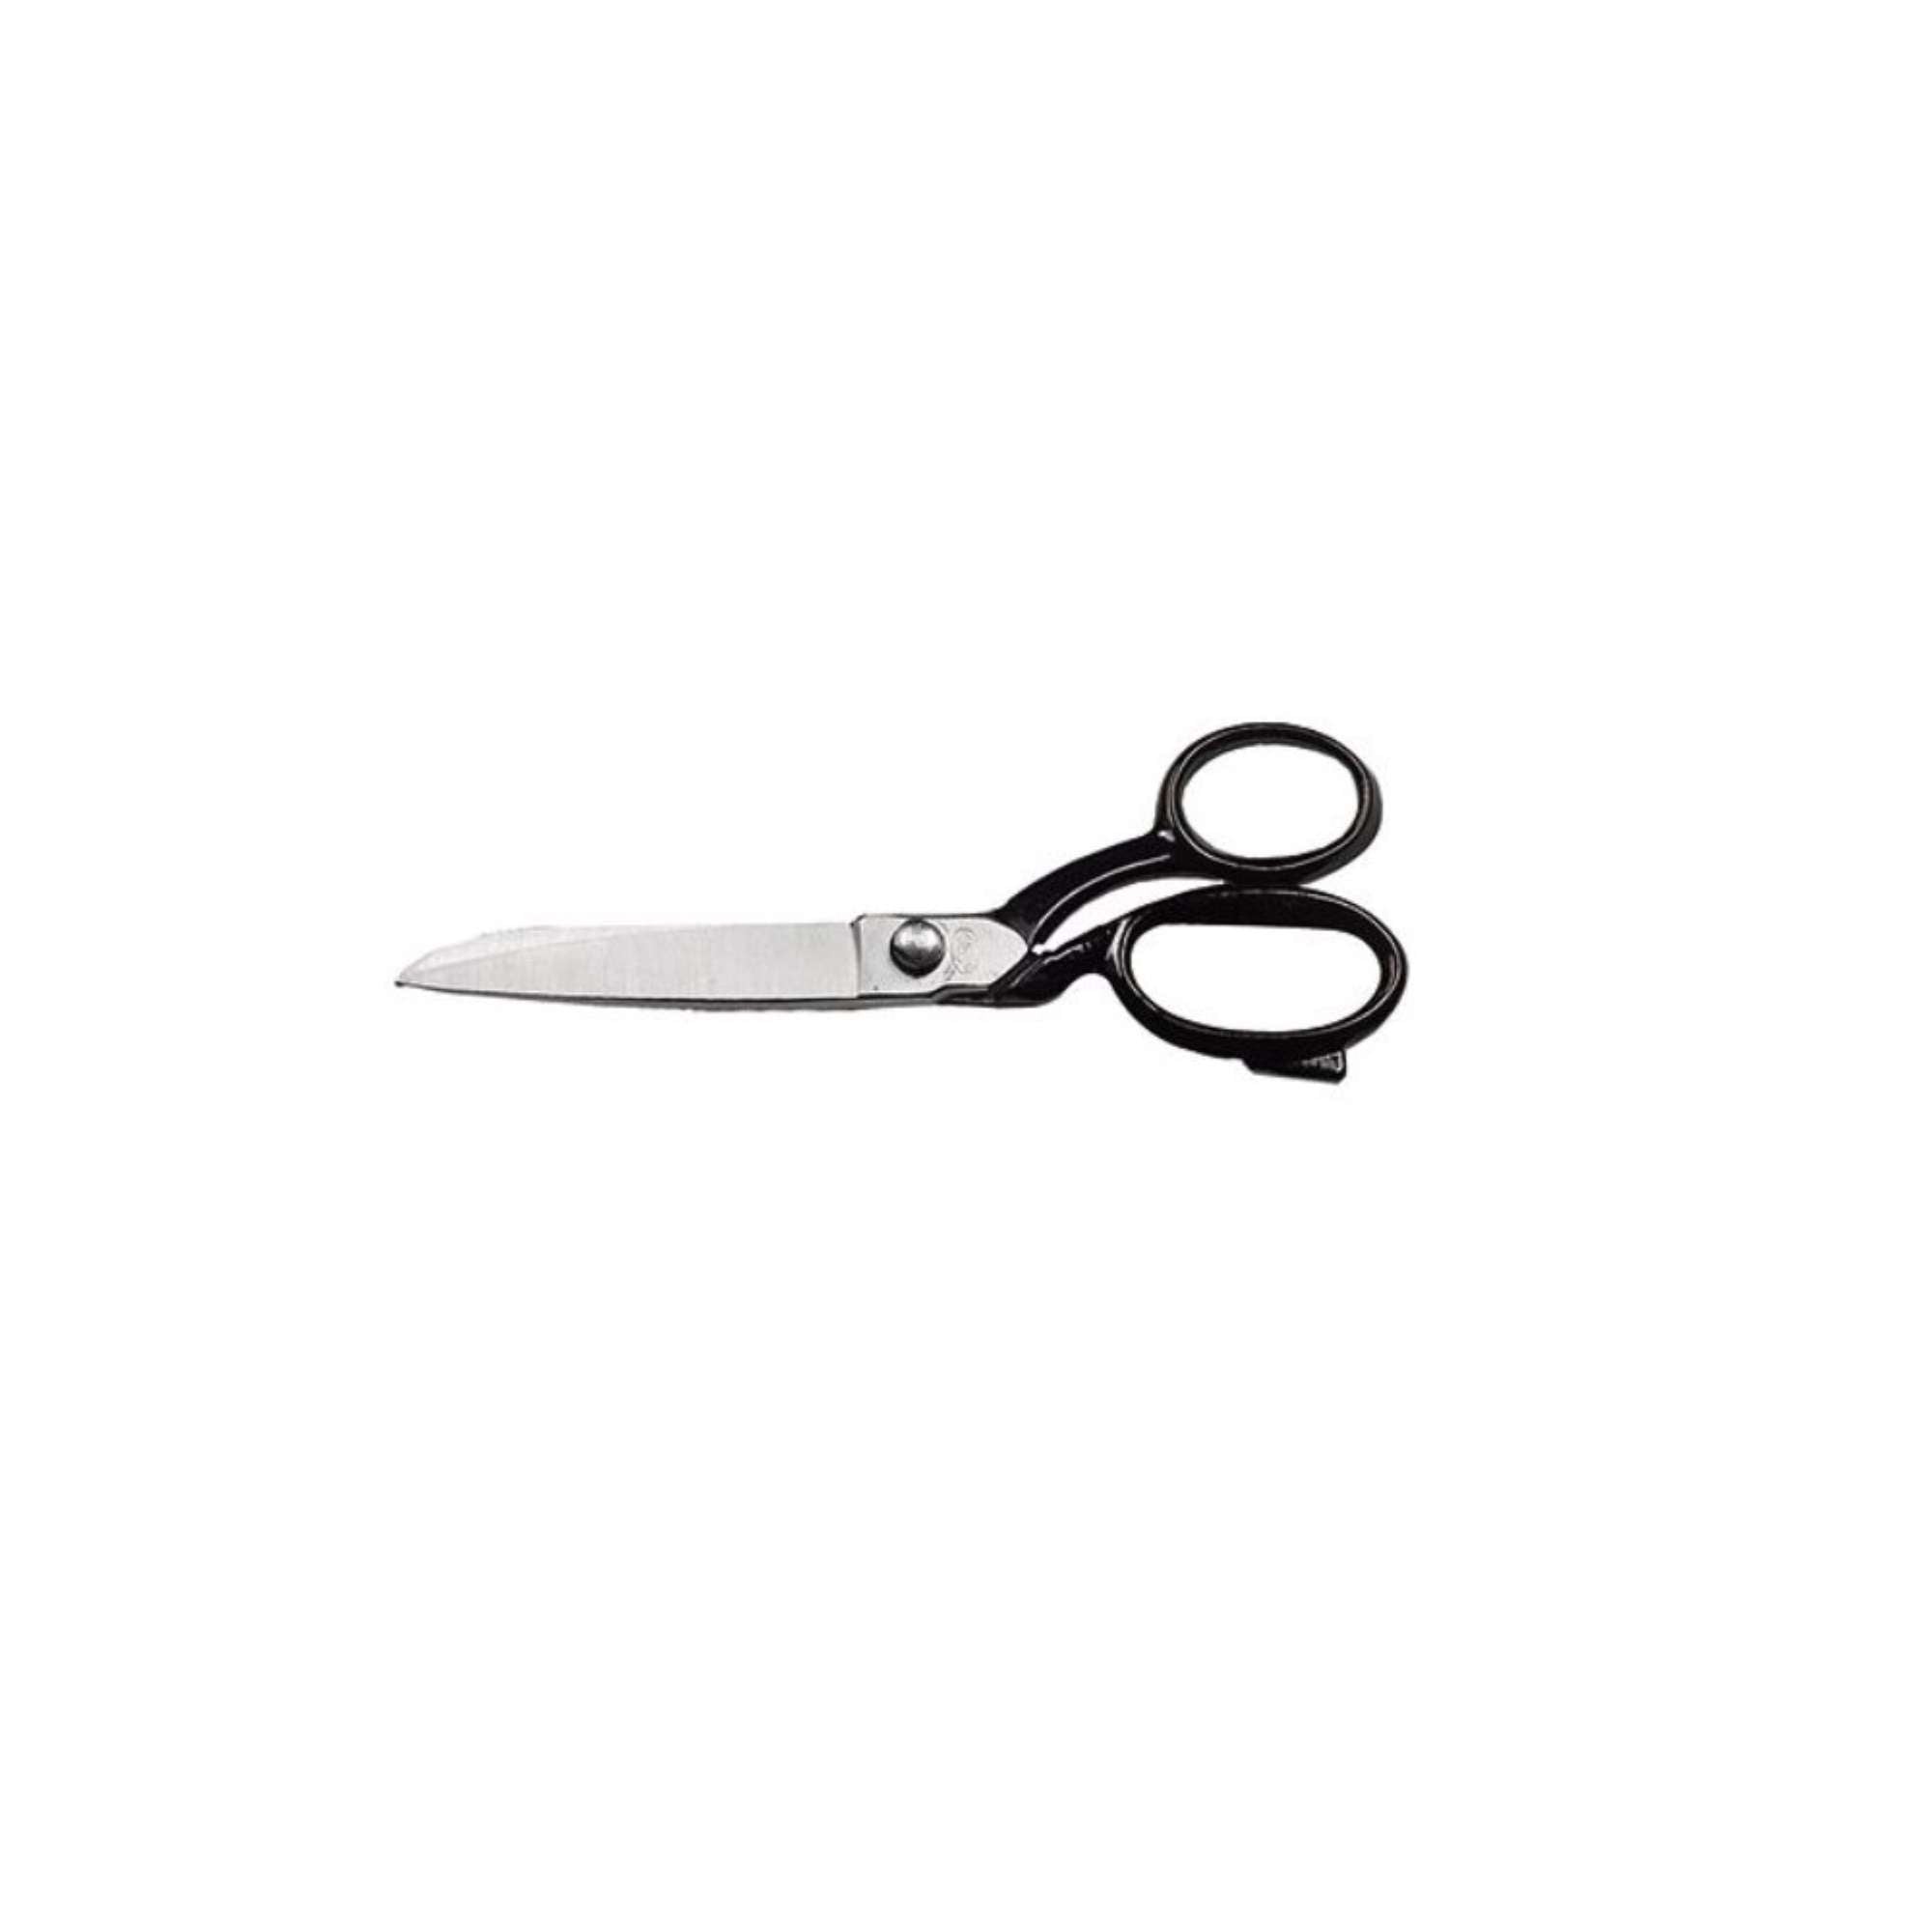 Tailor Type Scissors 200 mm long with forged steel blades - ABC Tools C 3721